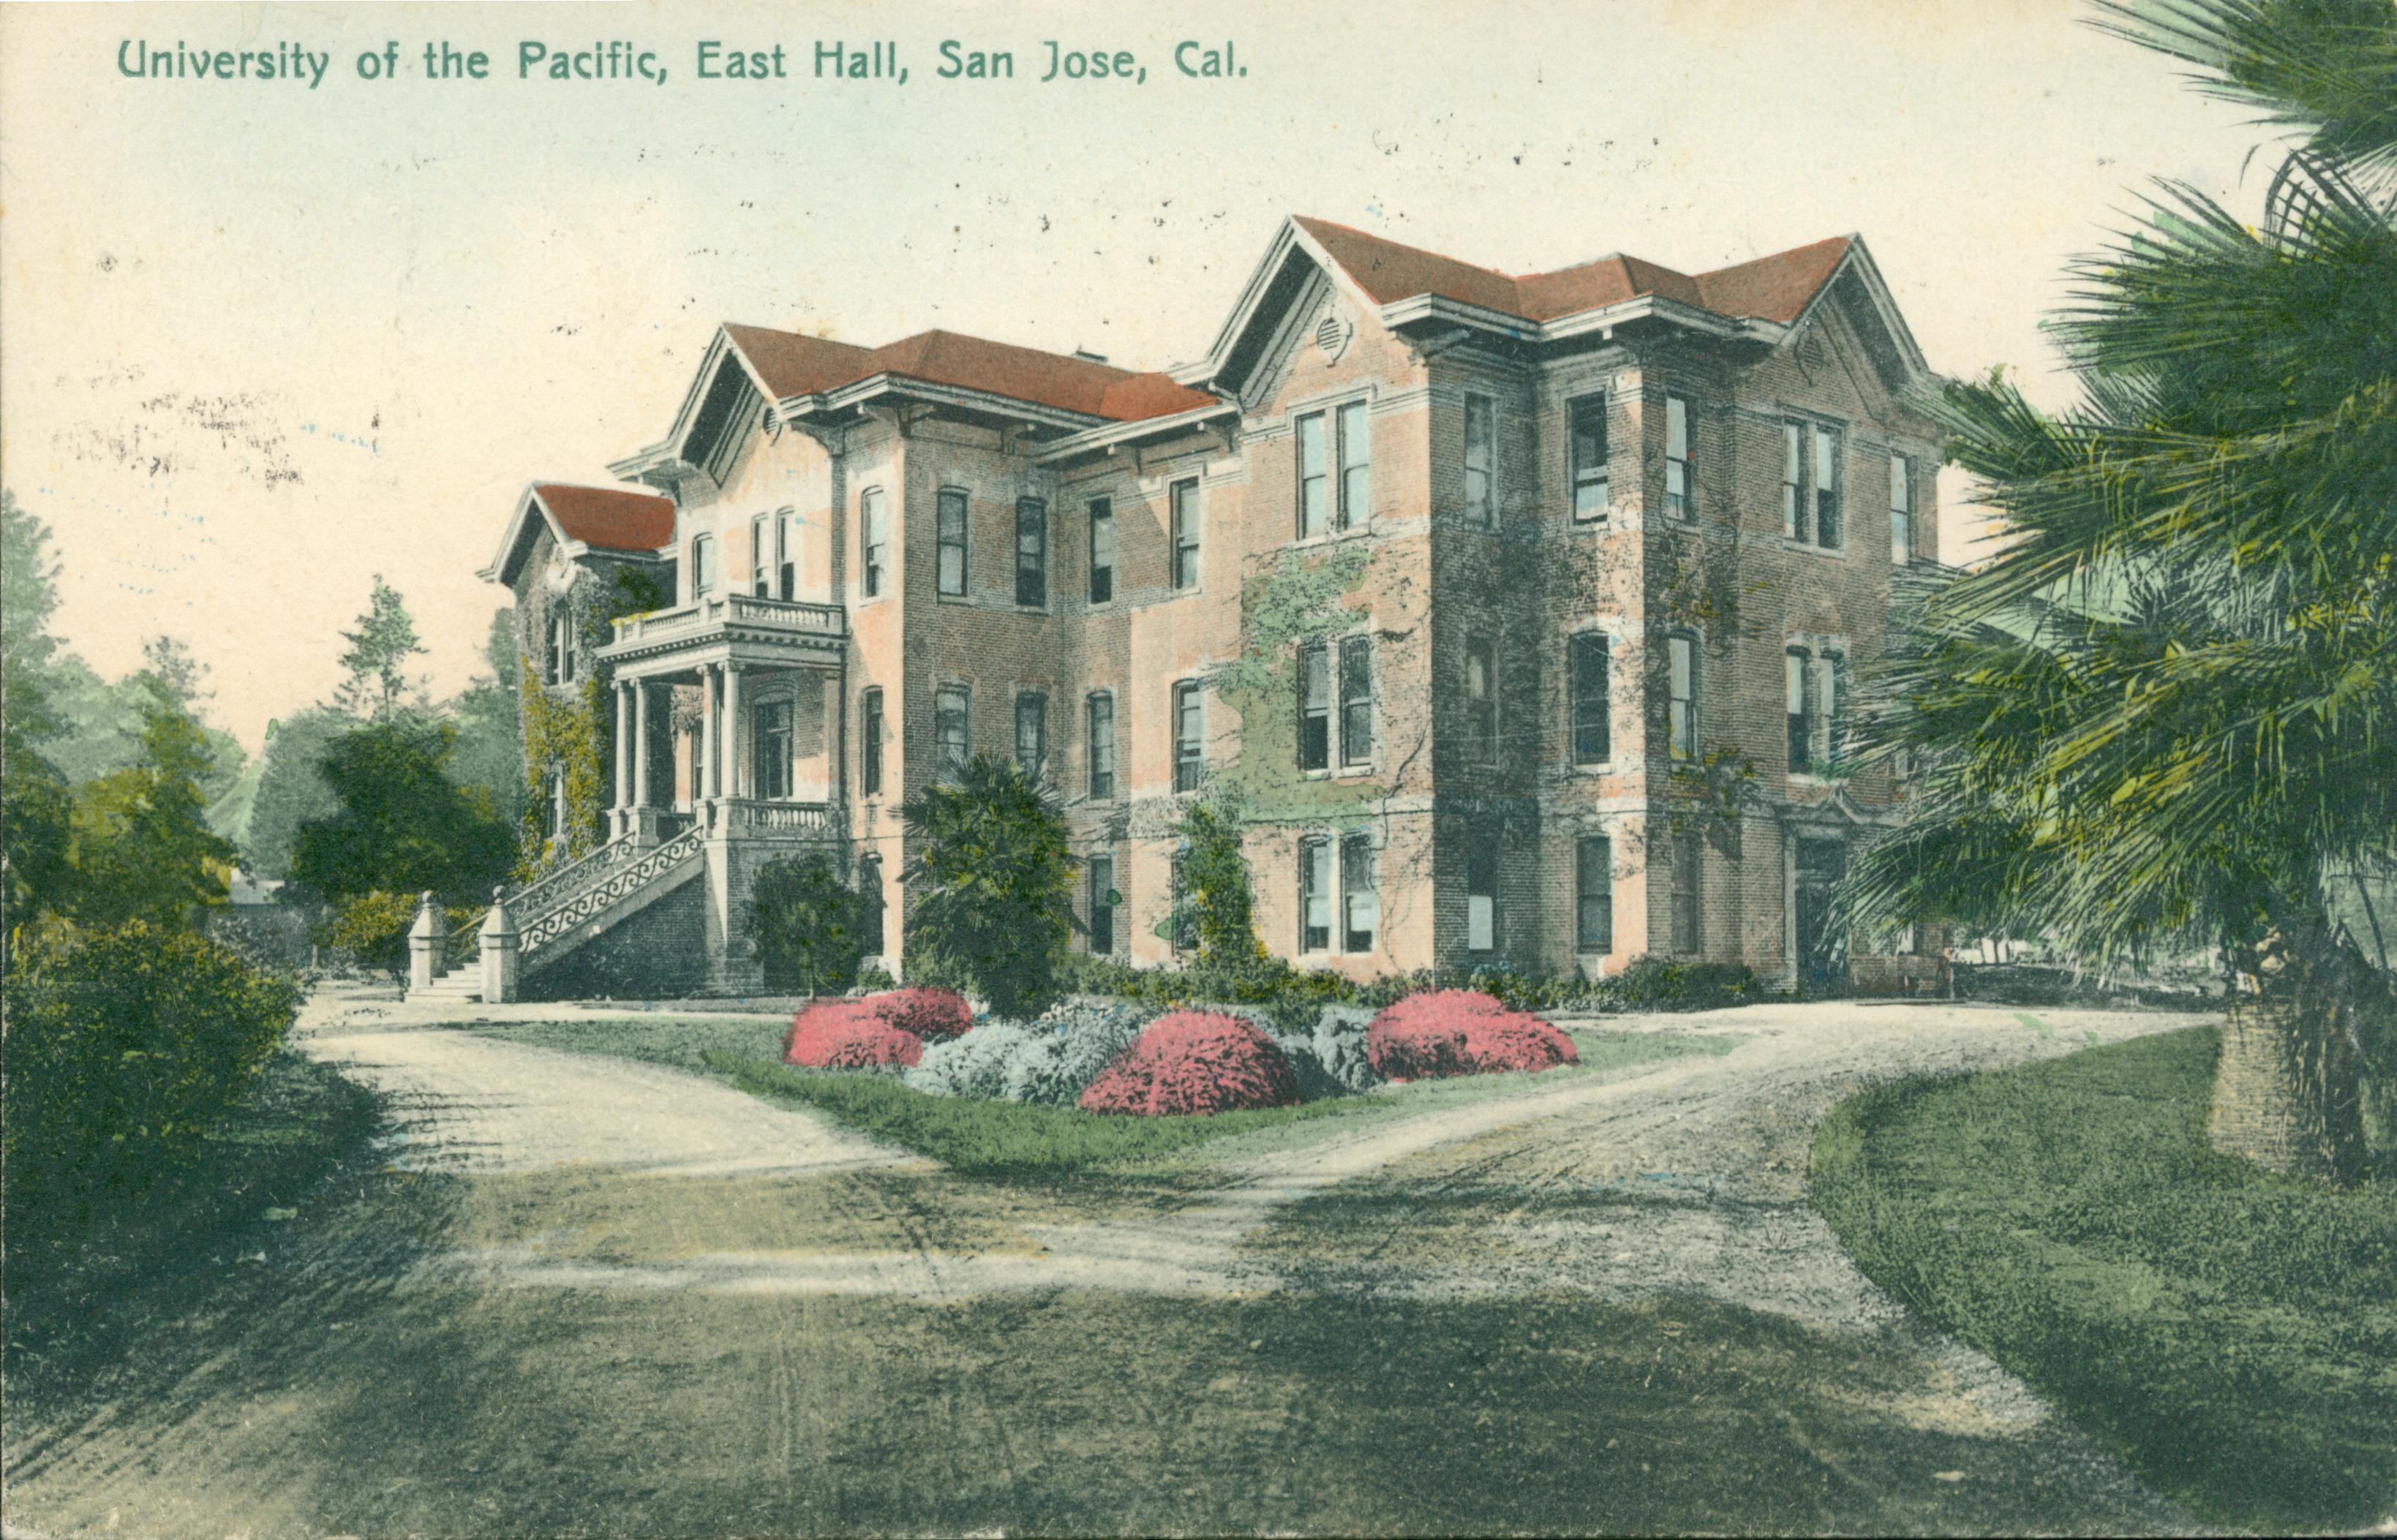 Shows the exterior of the East hall at University of the Pacific